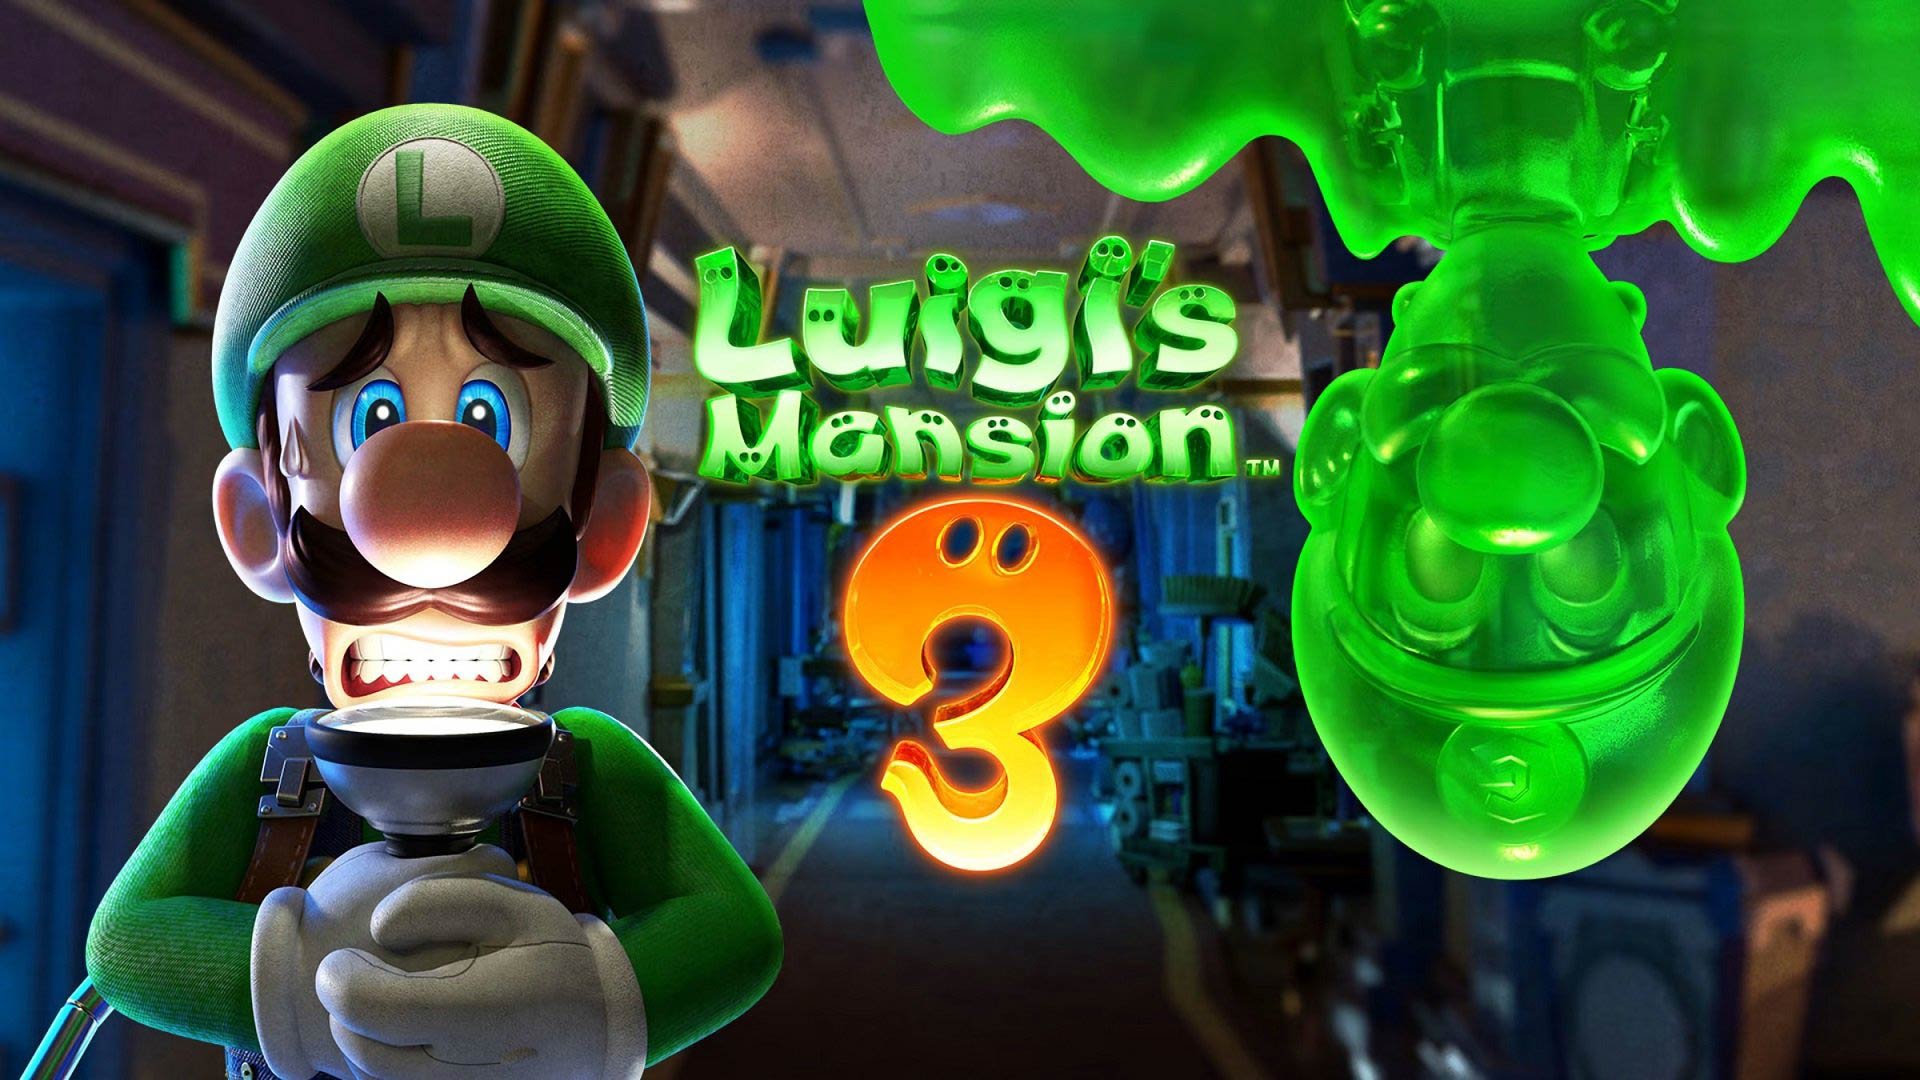 Is the Nintendo Switch Luigi's Mansion 3 the best game from the series?